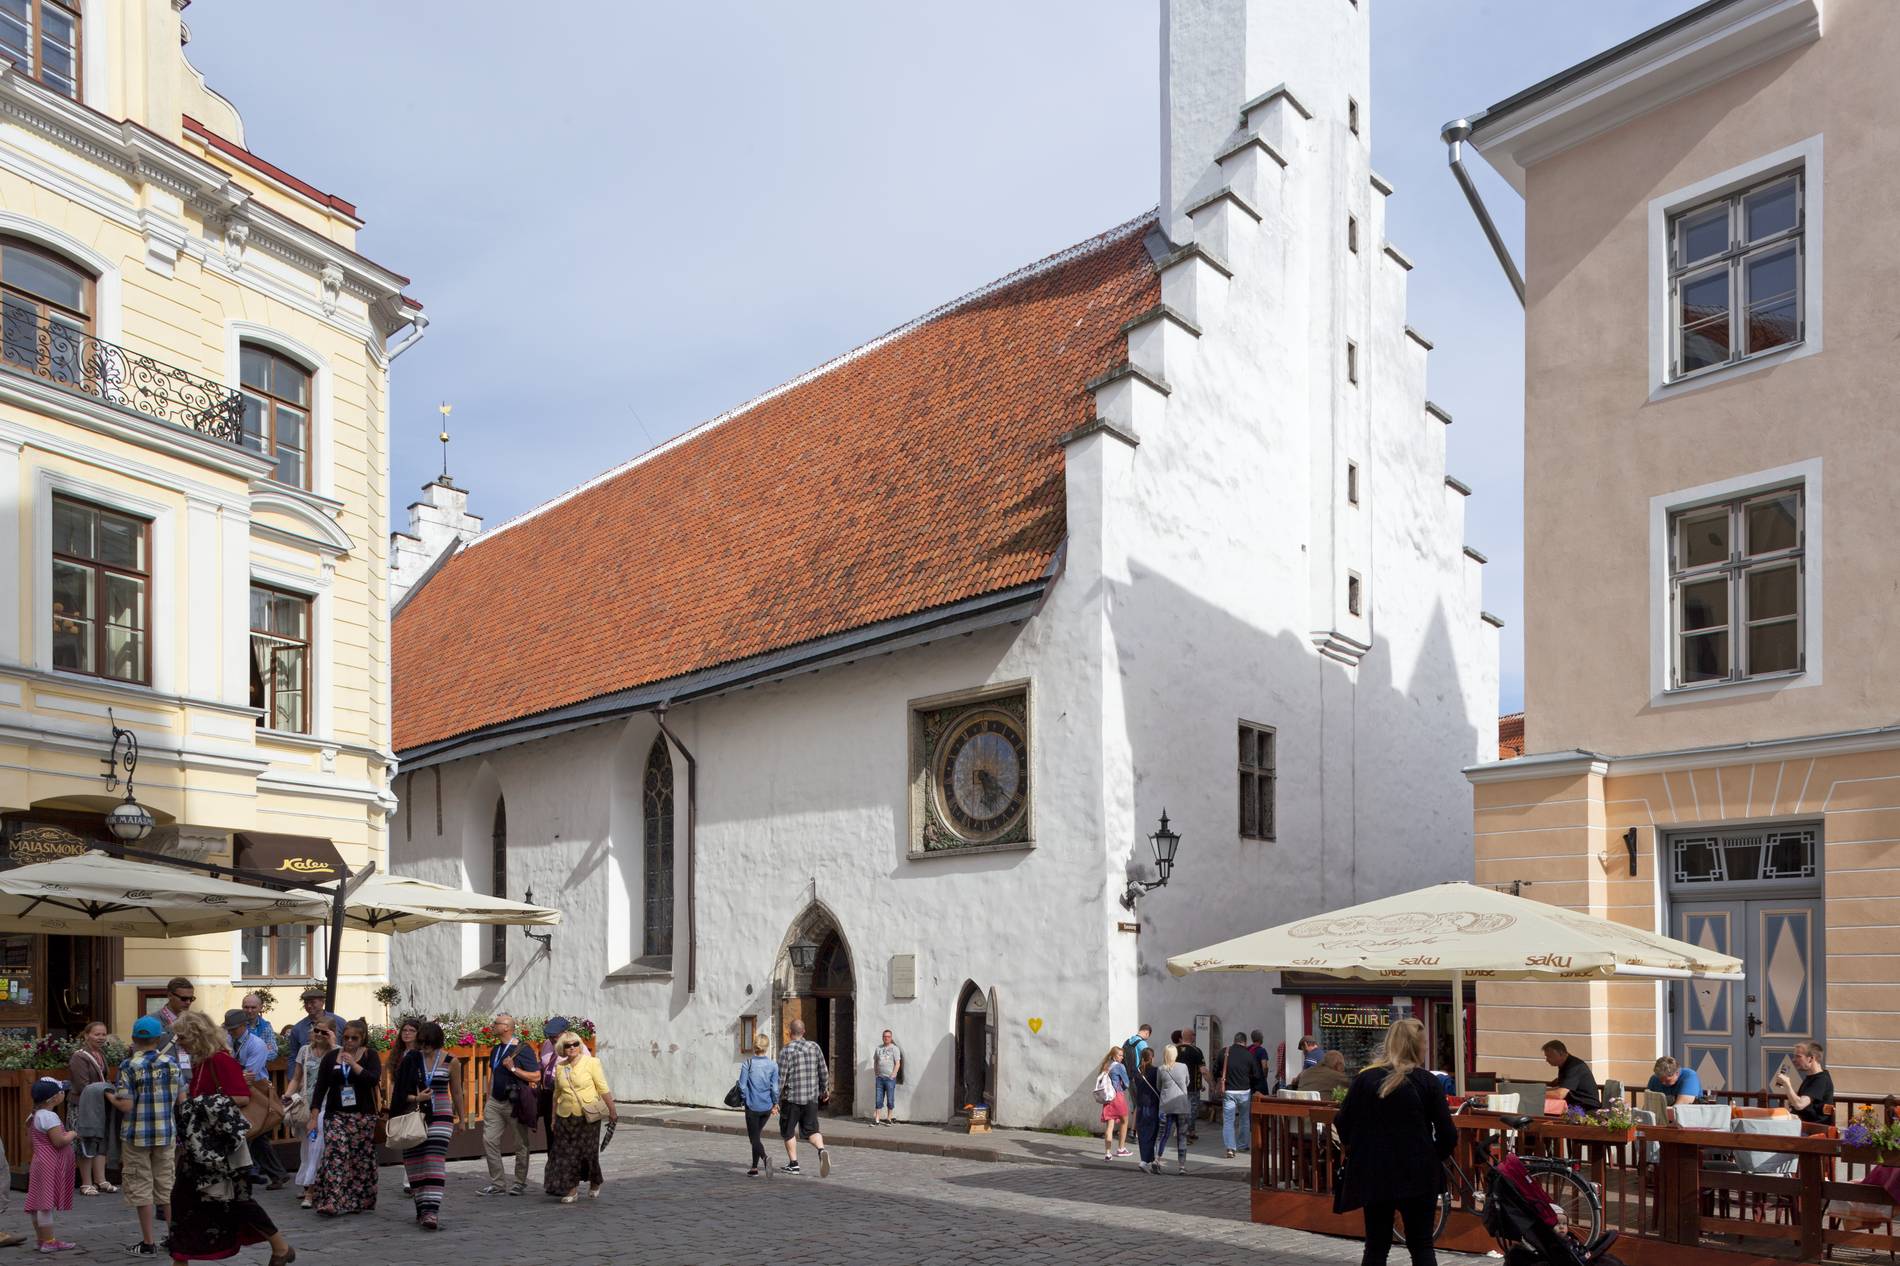 View of the Holy Spirit Church in the Old Town of Tallinn, Estonia